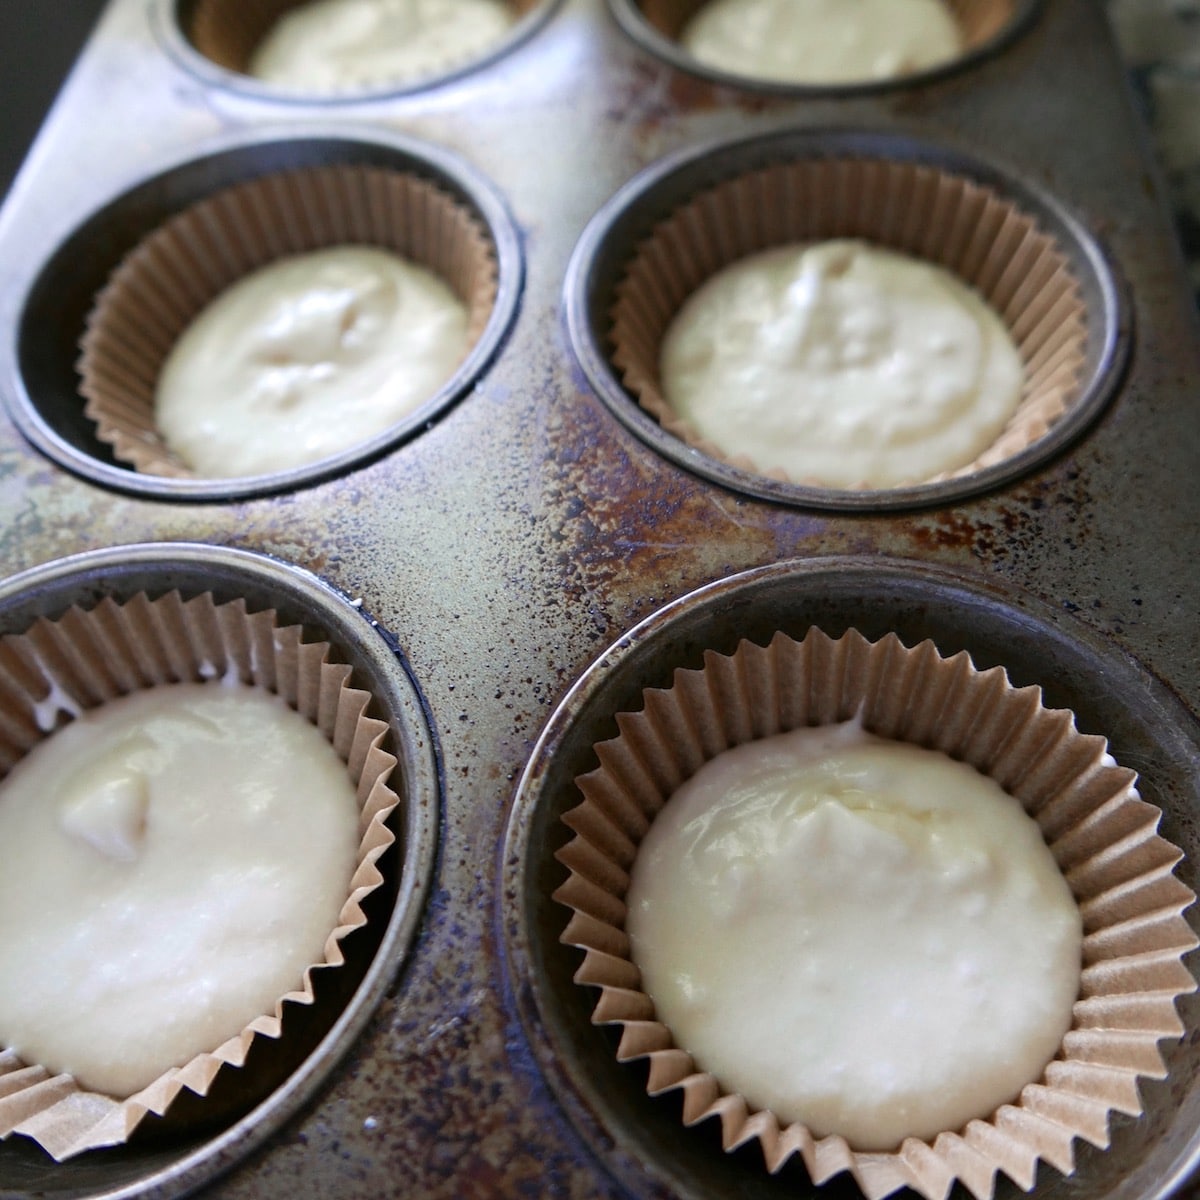 cupcake batter scooped into lined muffin tin.